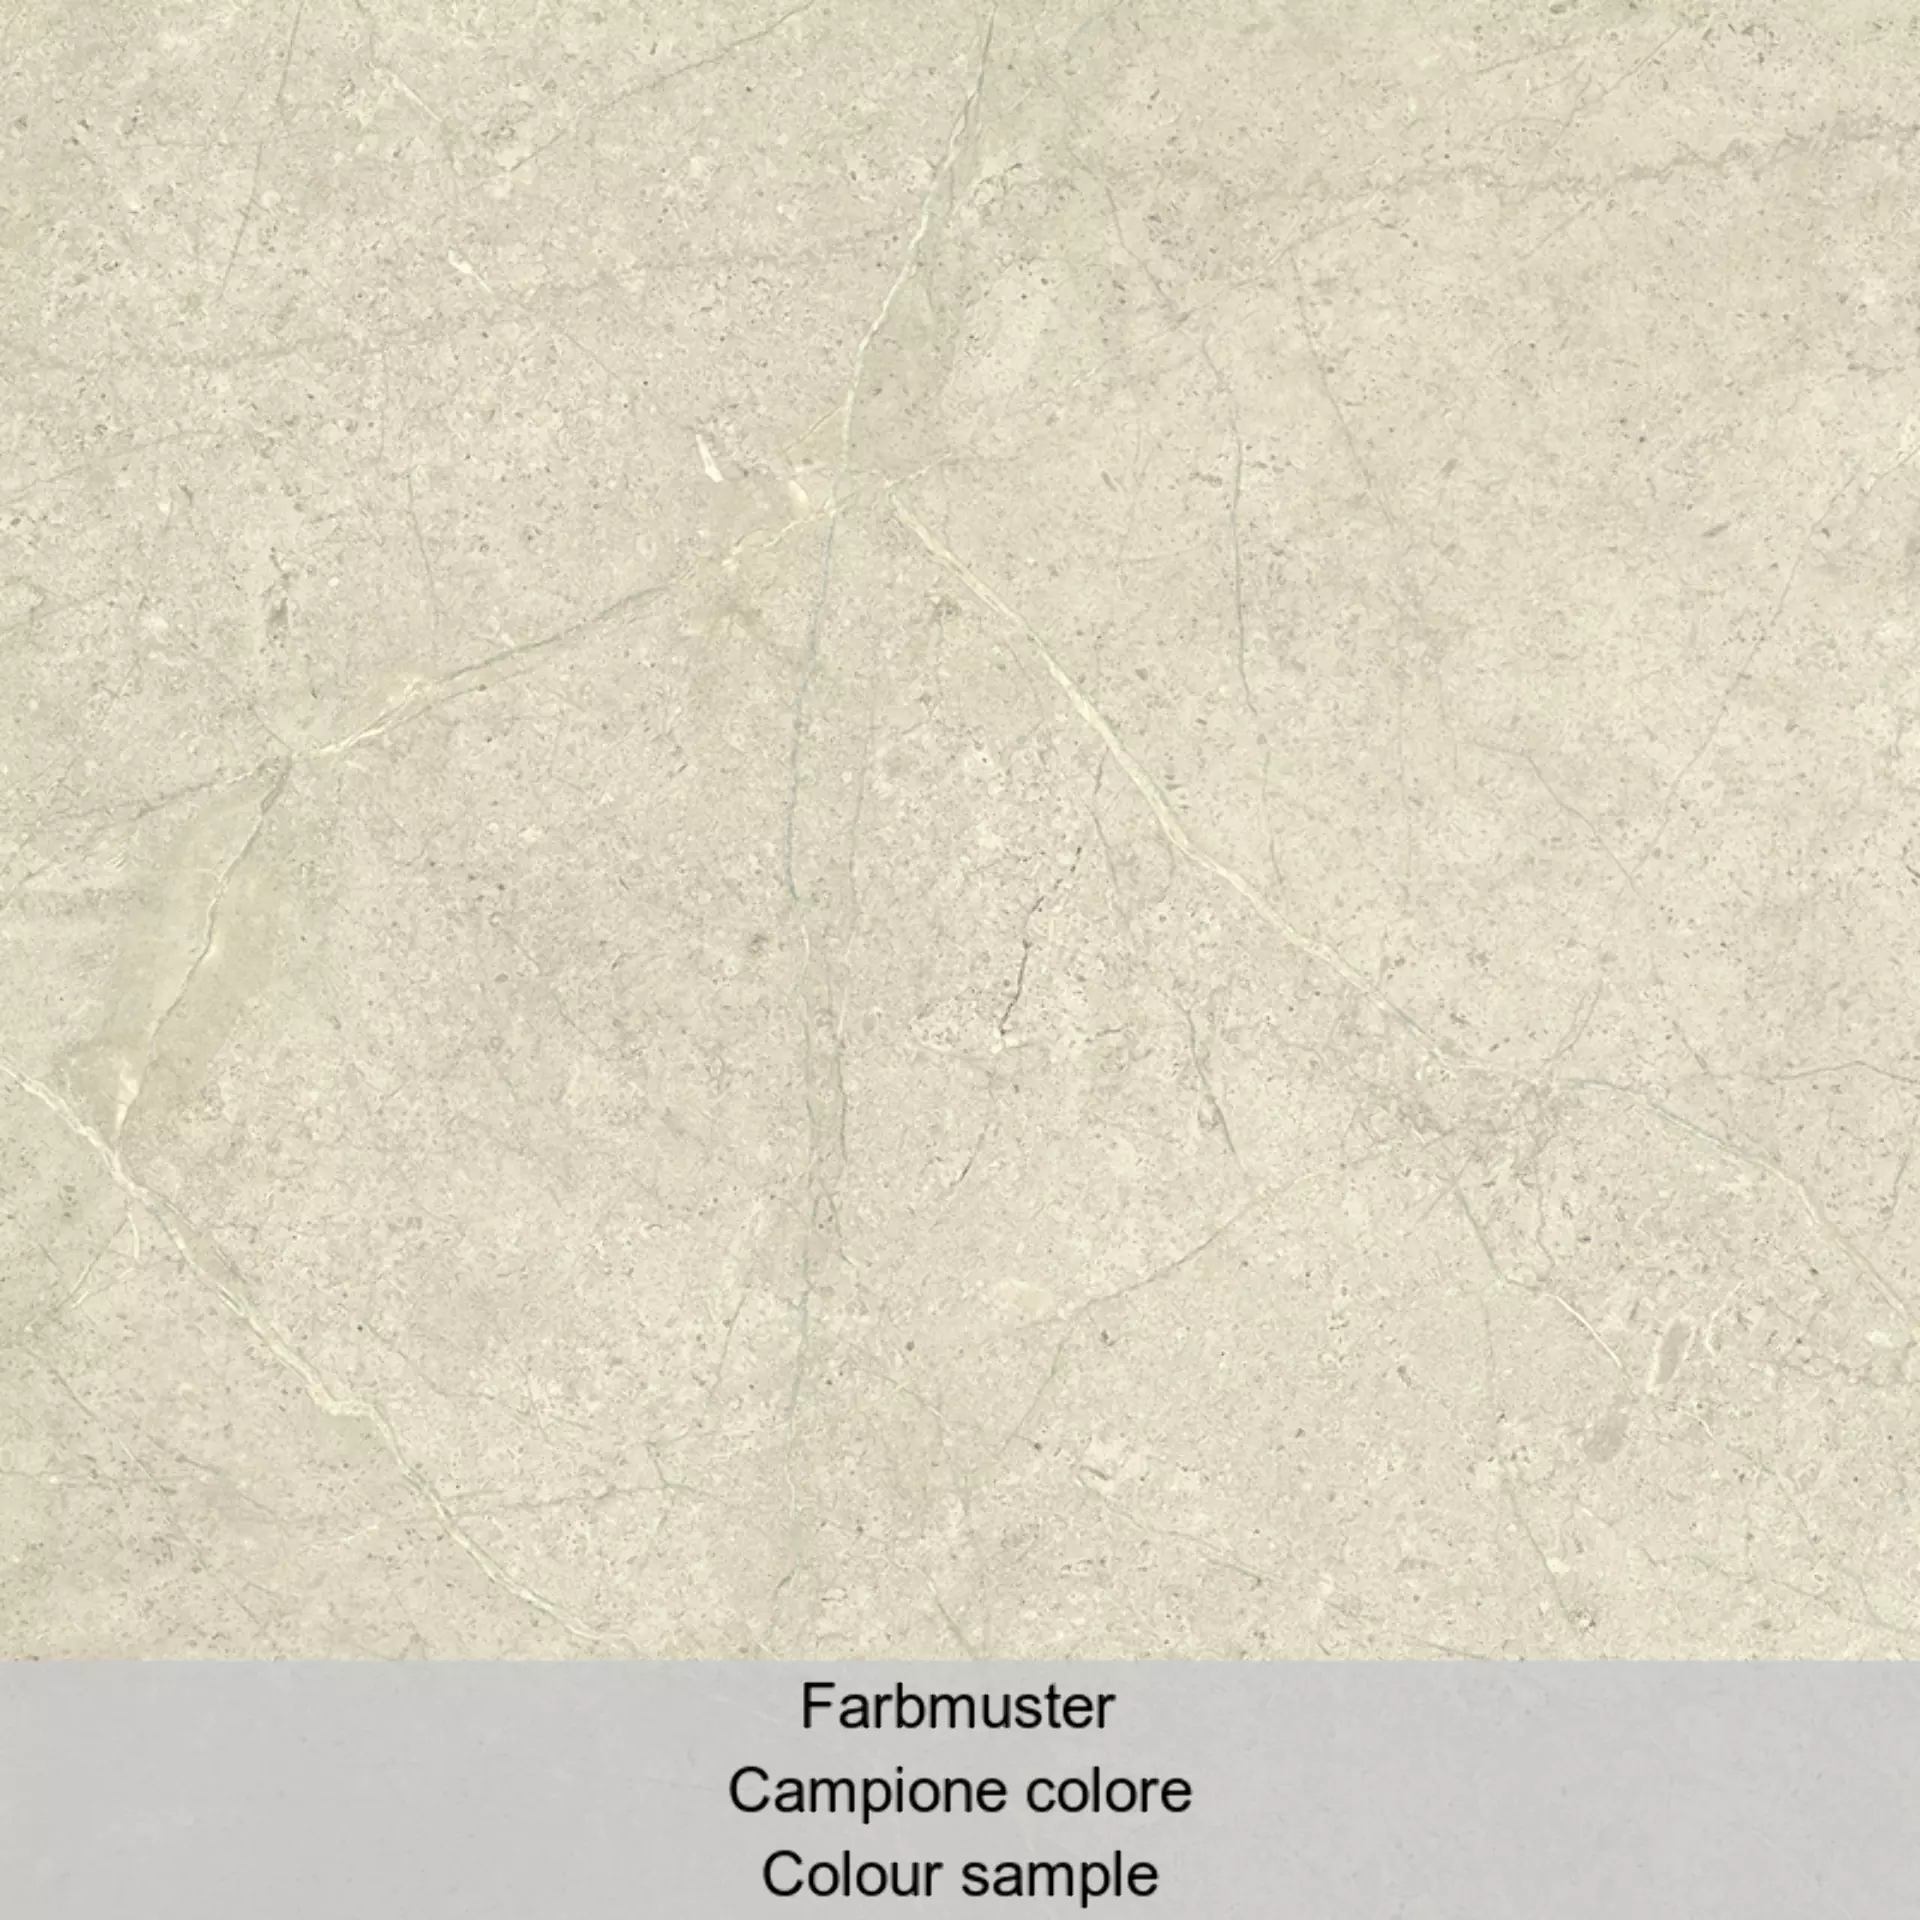 Lea Anthology 01 White Naturale – Antibacterial LGWAL15 60x60cm rectified 9,5mm